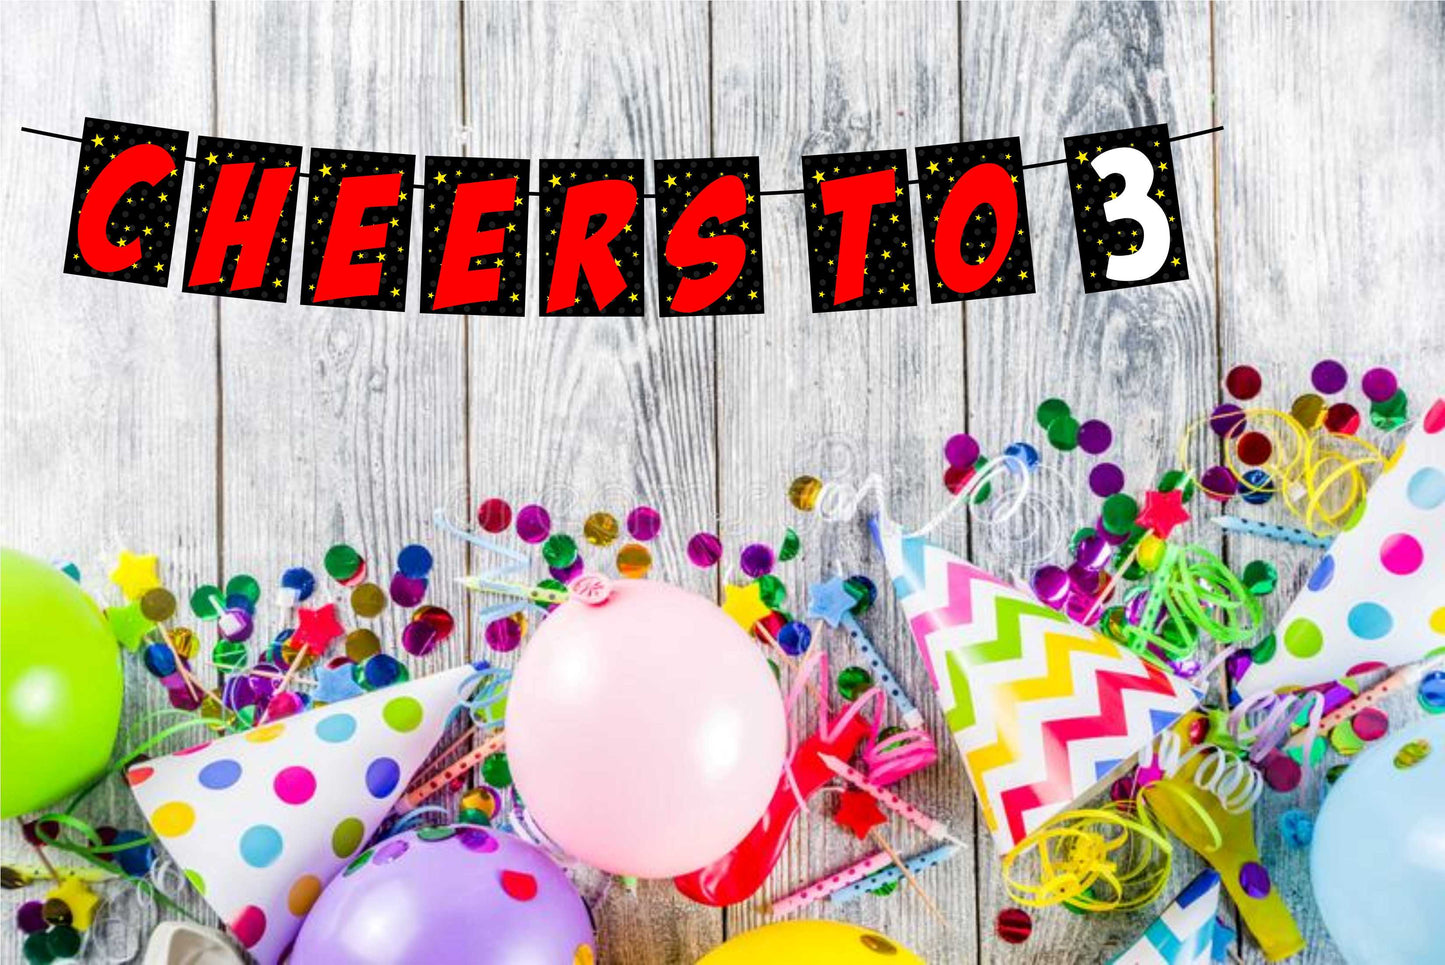 Cheers to 3 Third Birthday Banner for Photo Shoot Backdrop and Theme Party